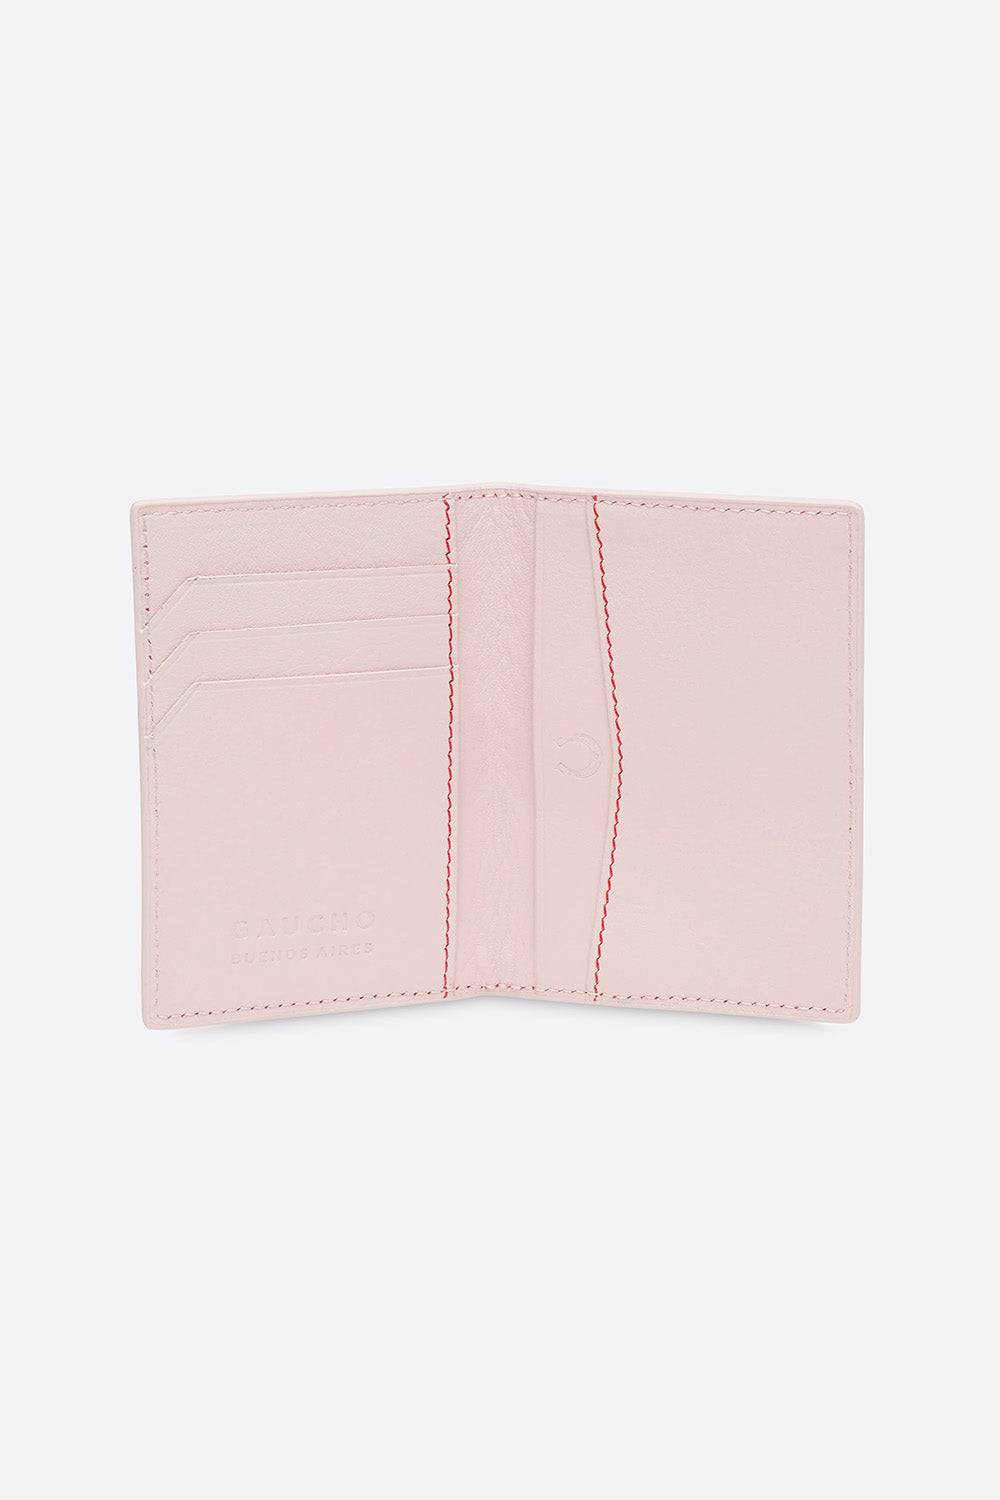 Card Case in Peony Pink